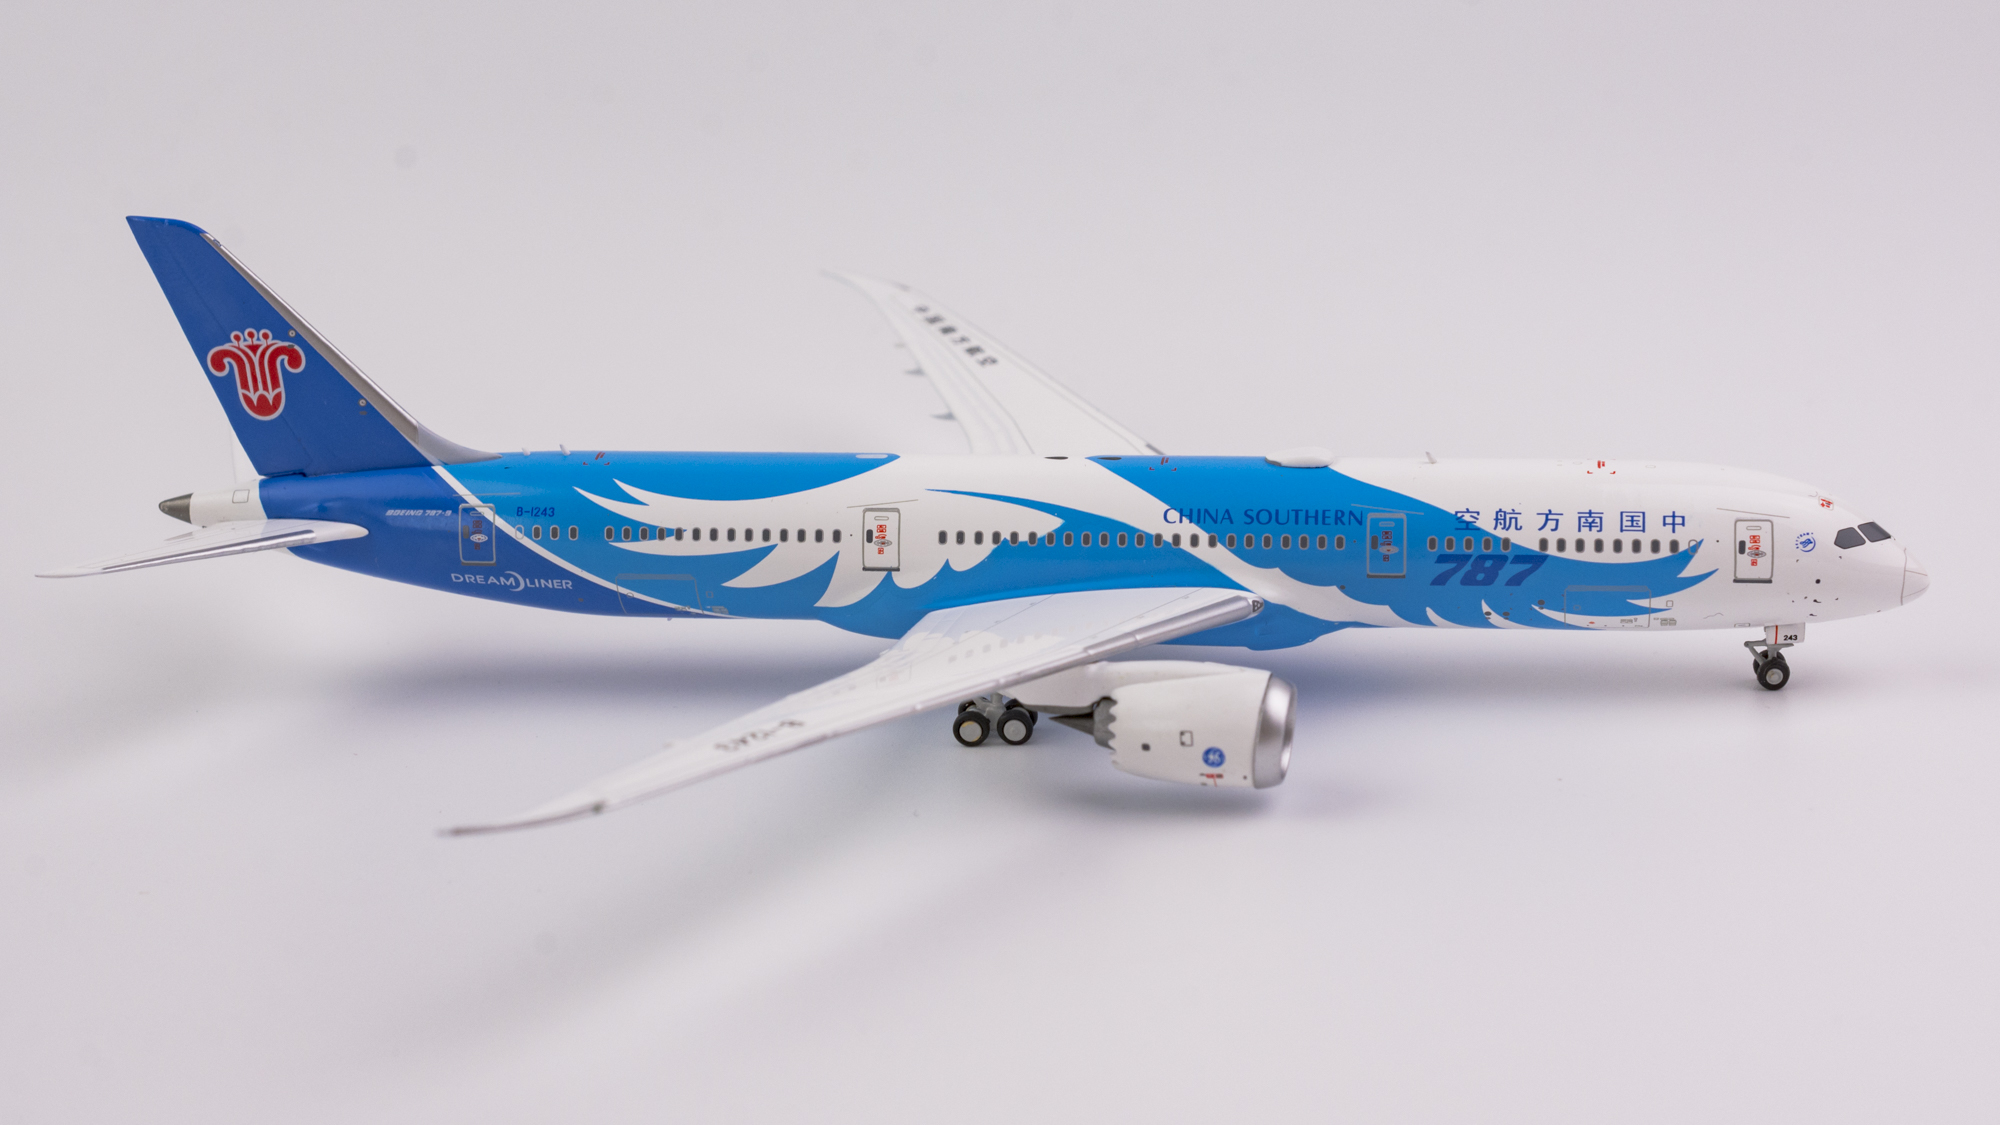 Details about   IF789CZ0319 1/200 CHINA SOUTHERN AIRLINES B787-9 DREAMLINER B-1168 THE 787TH 787 